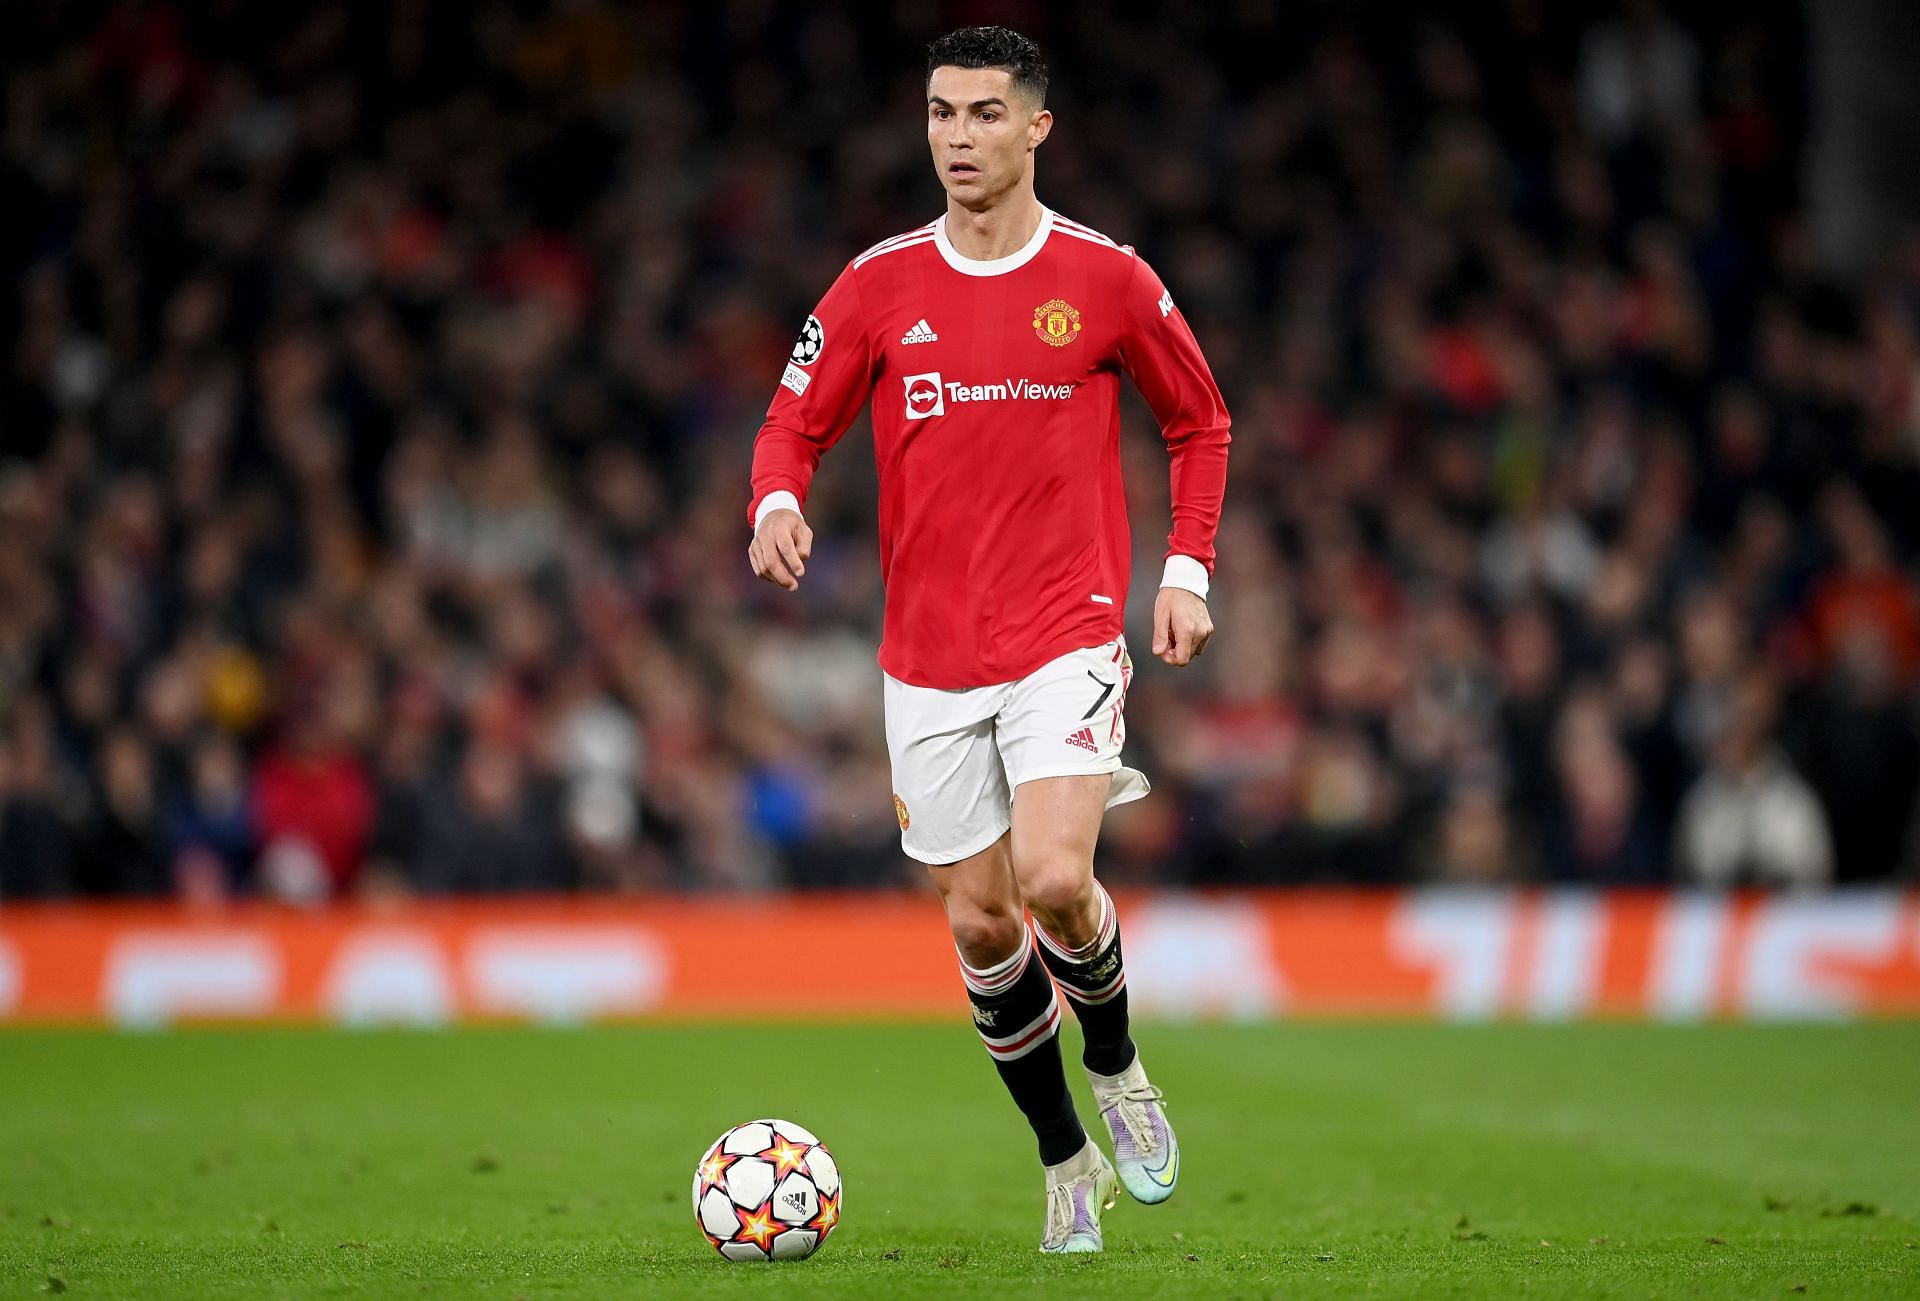 Cristiano Ronaldo is going strong at Manchester United